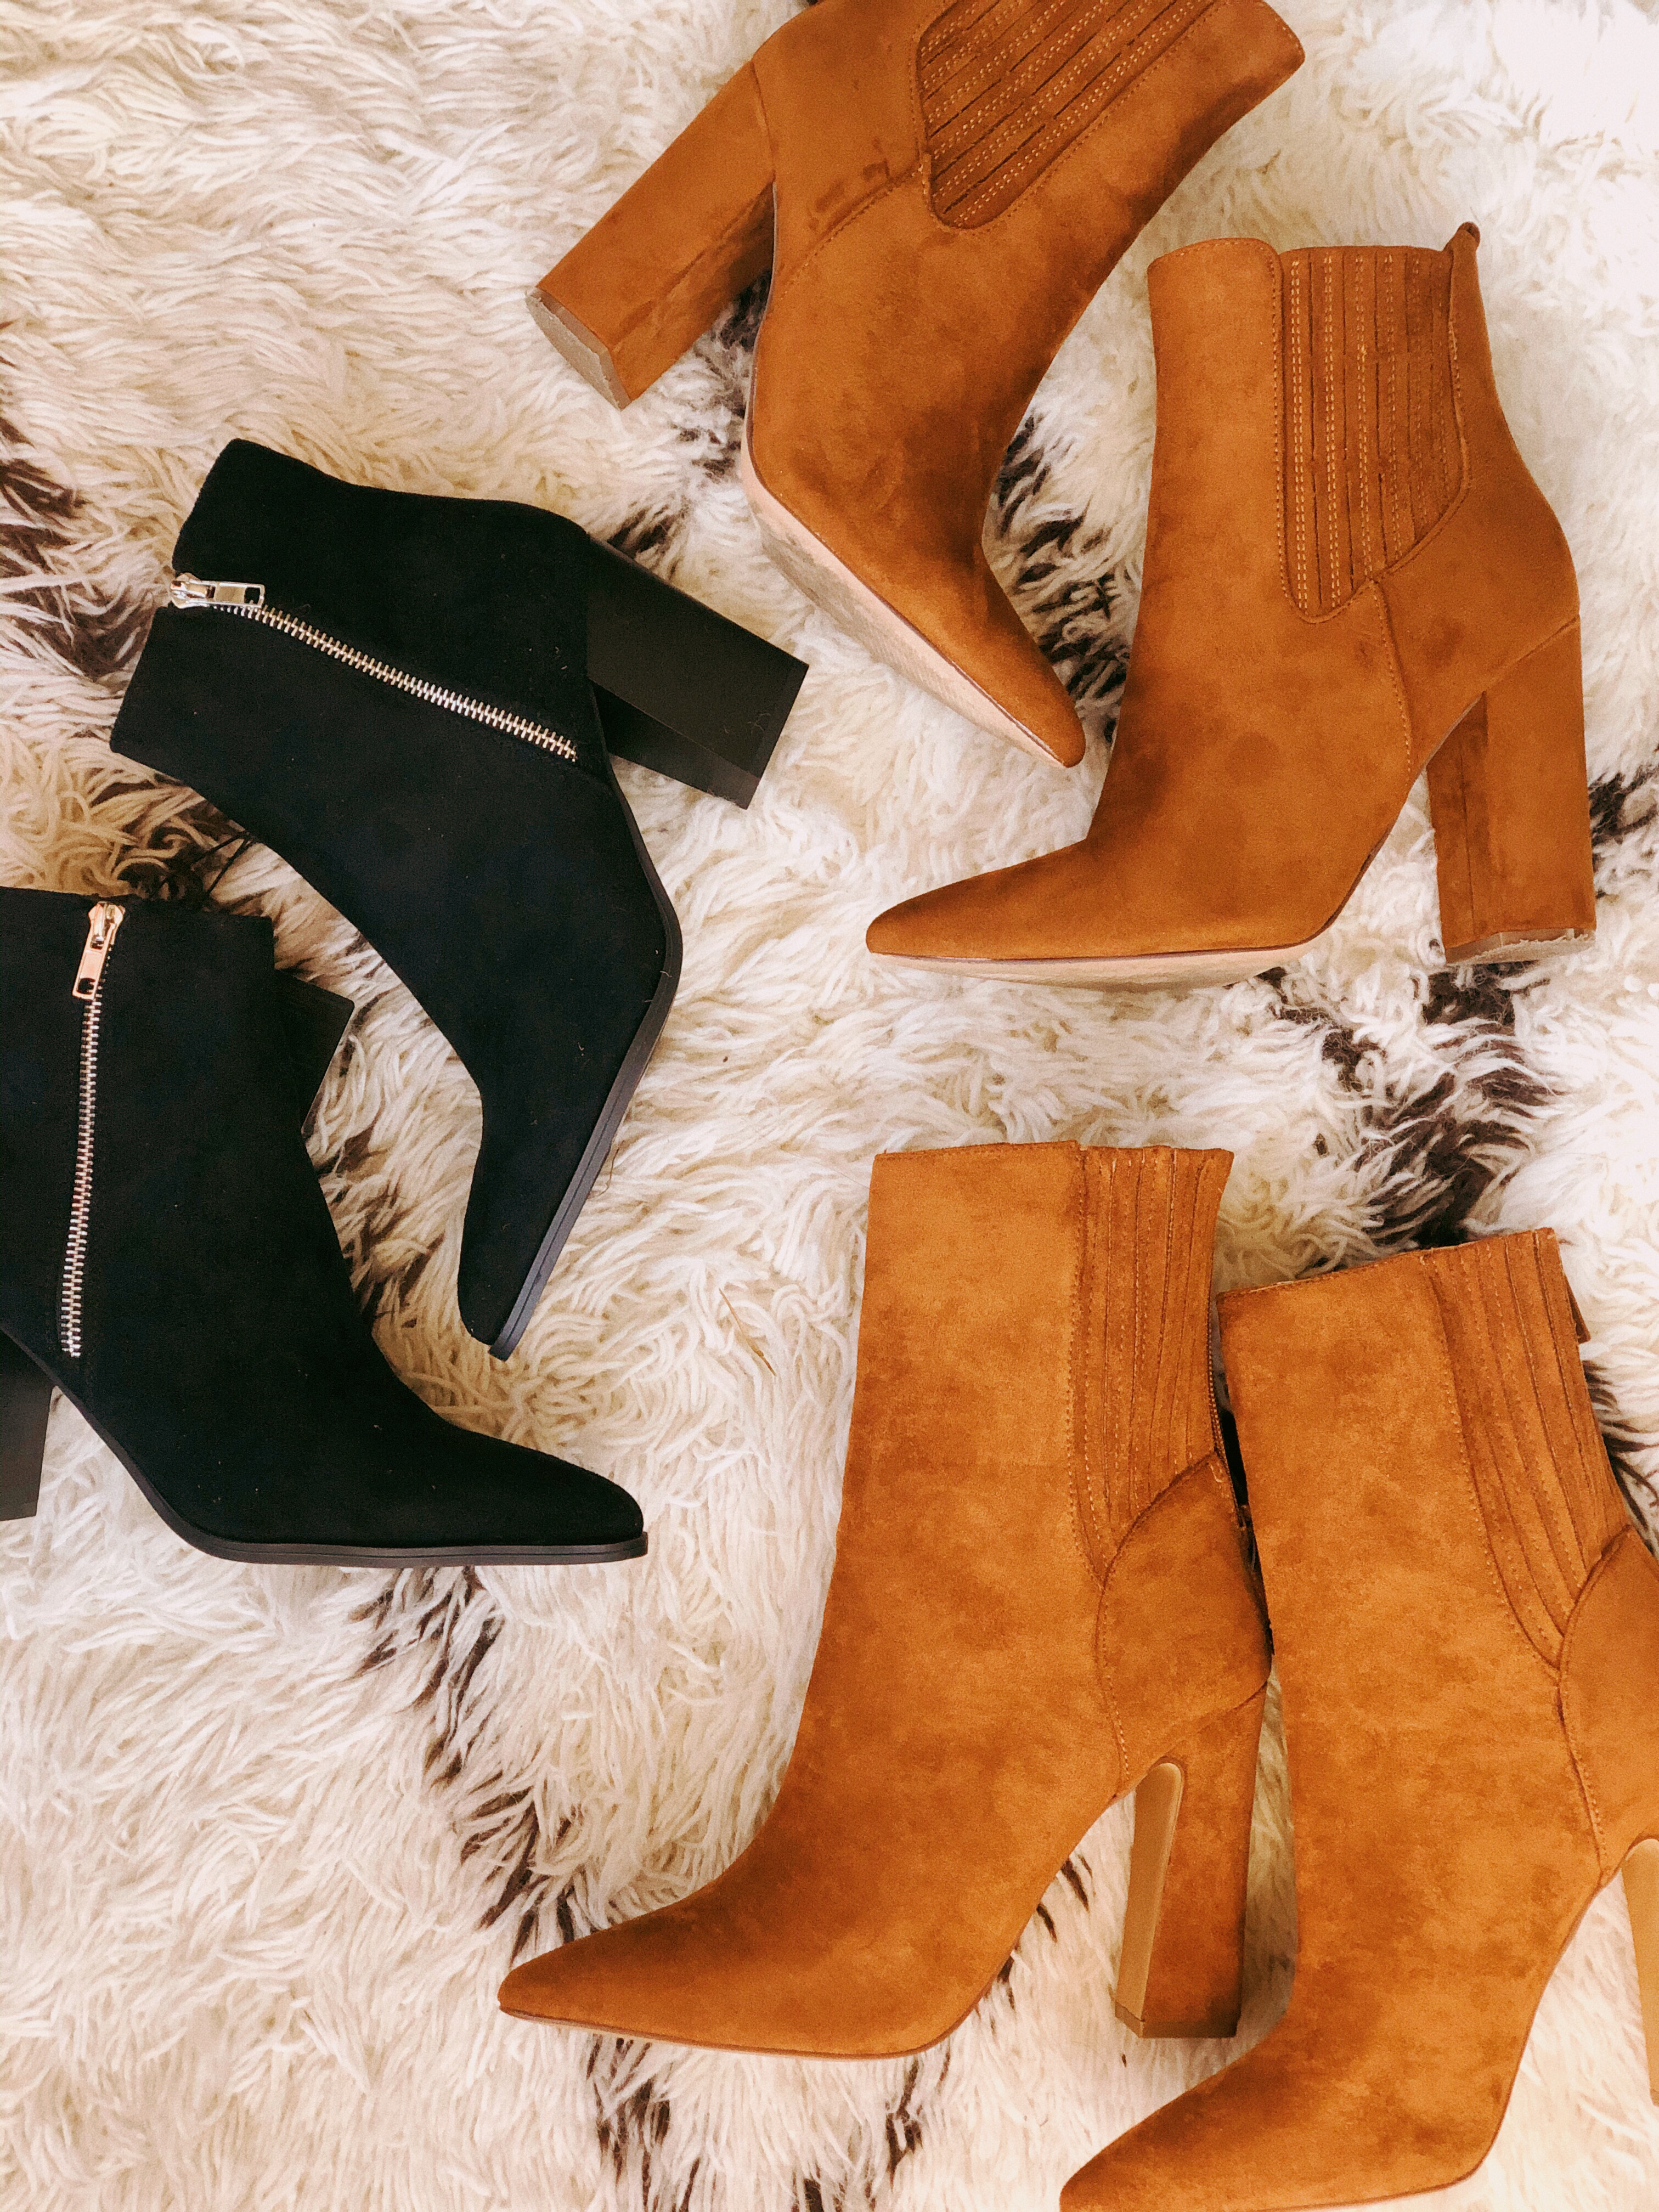 The Secret Place to Find the Best Fall Boots is... Haute Homebody